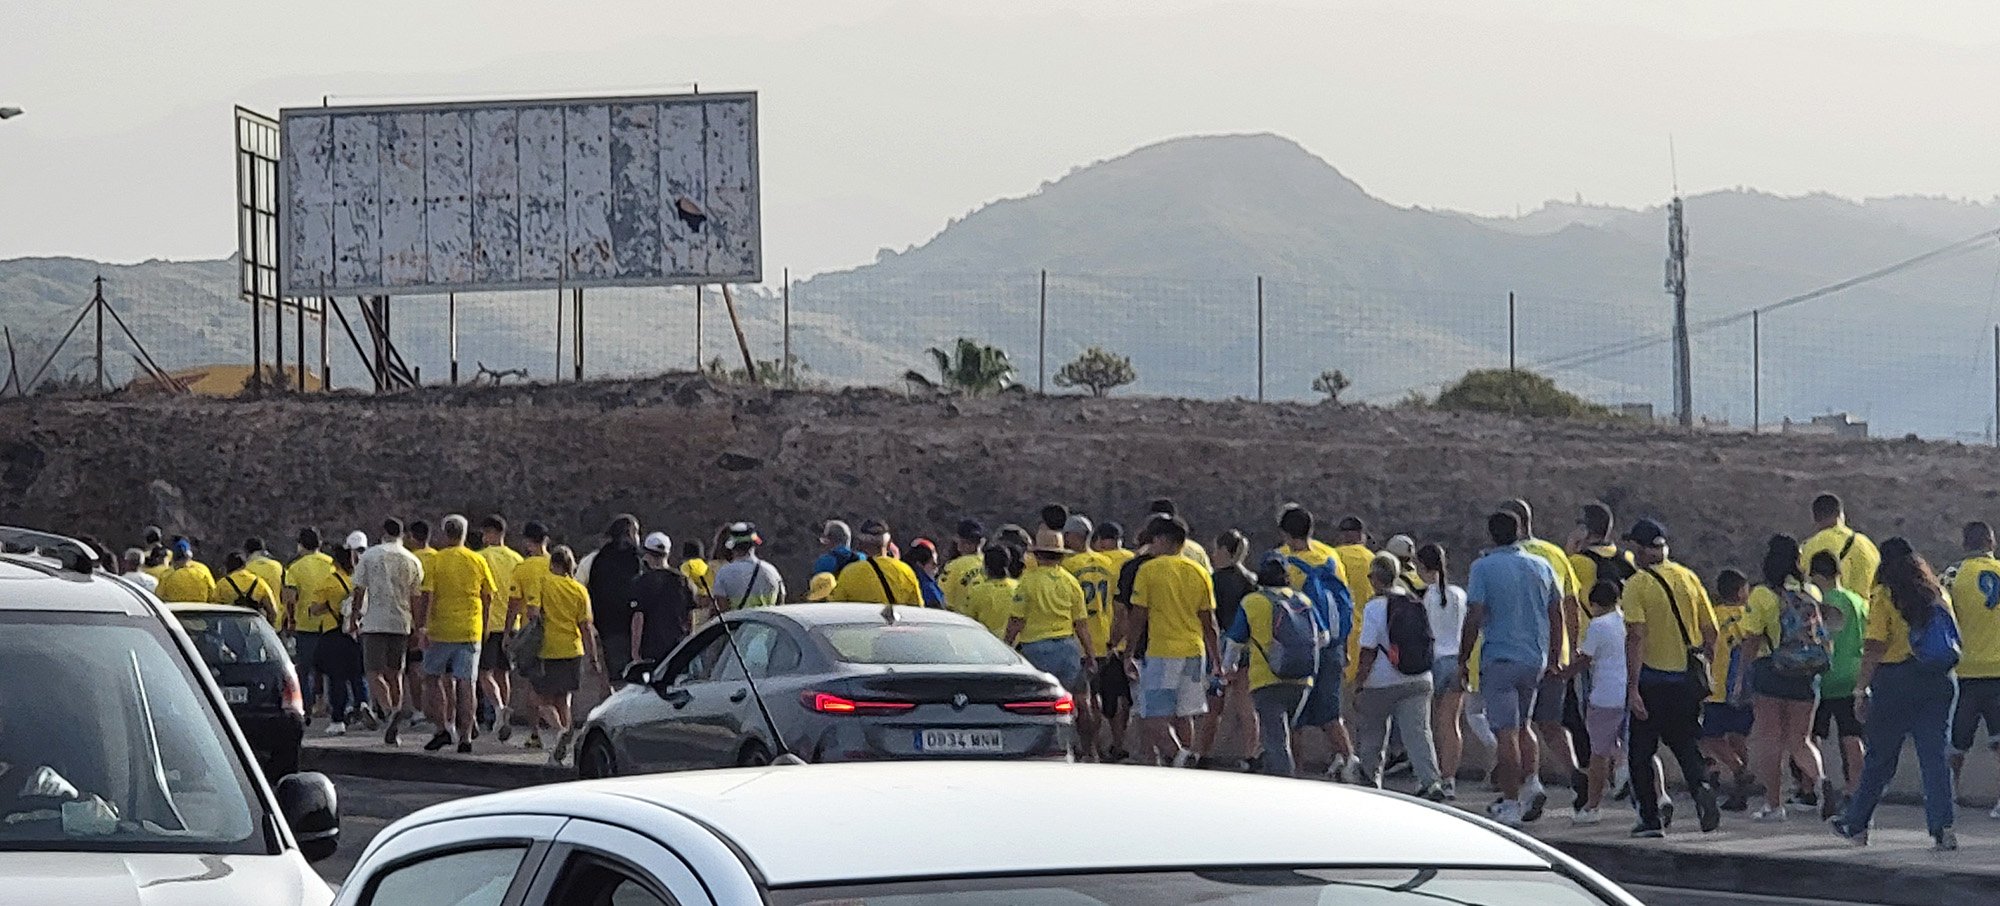 Stuck in socc...er FUTBOL traffic while going back to Las Palmas city center. There were thousands of these yellow shirt people, it was crazy.